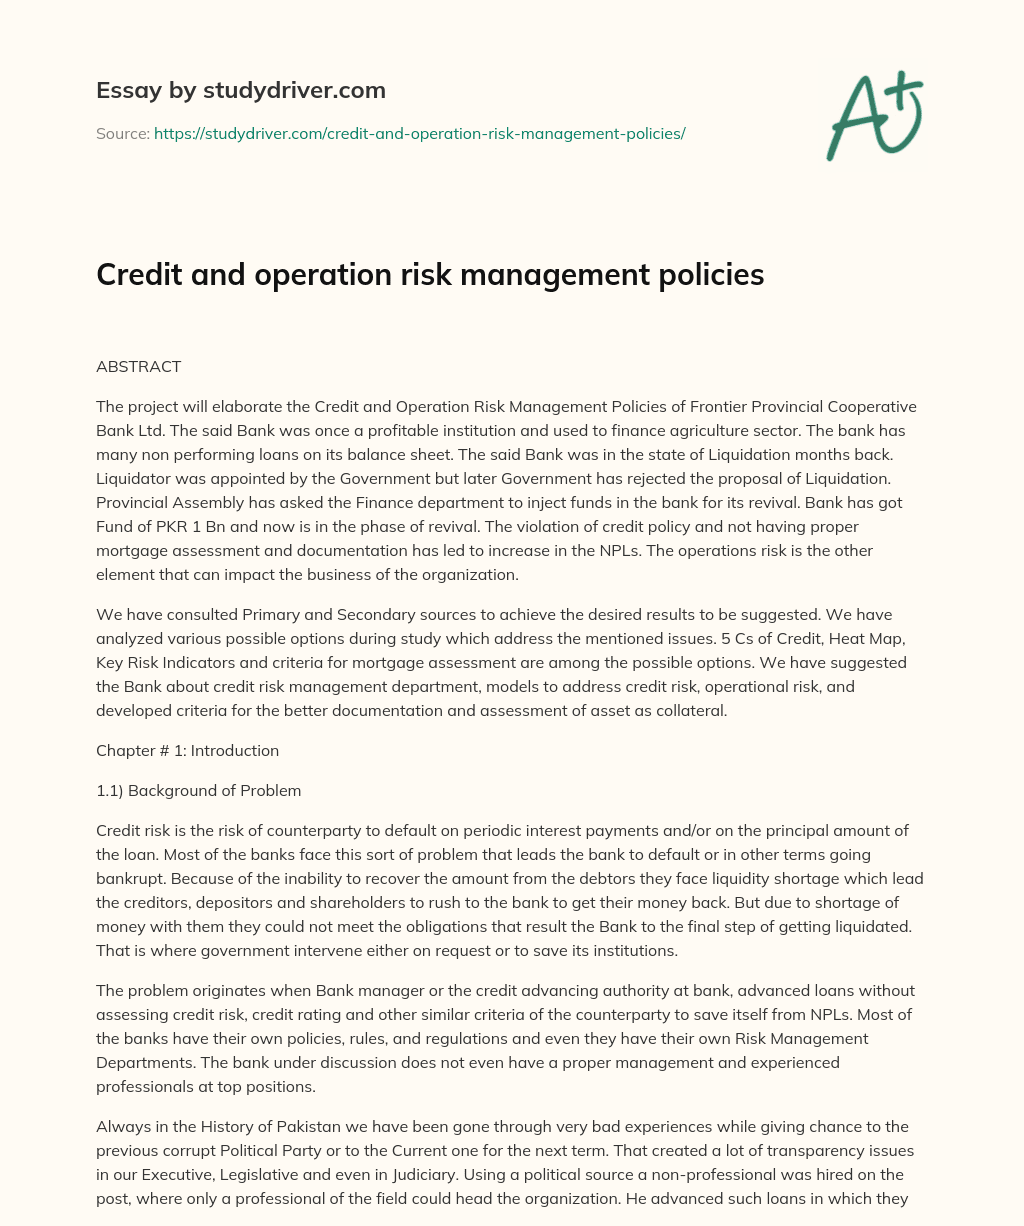 Credit and Operation Risk Management Policies essay